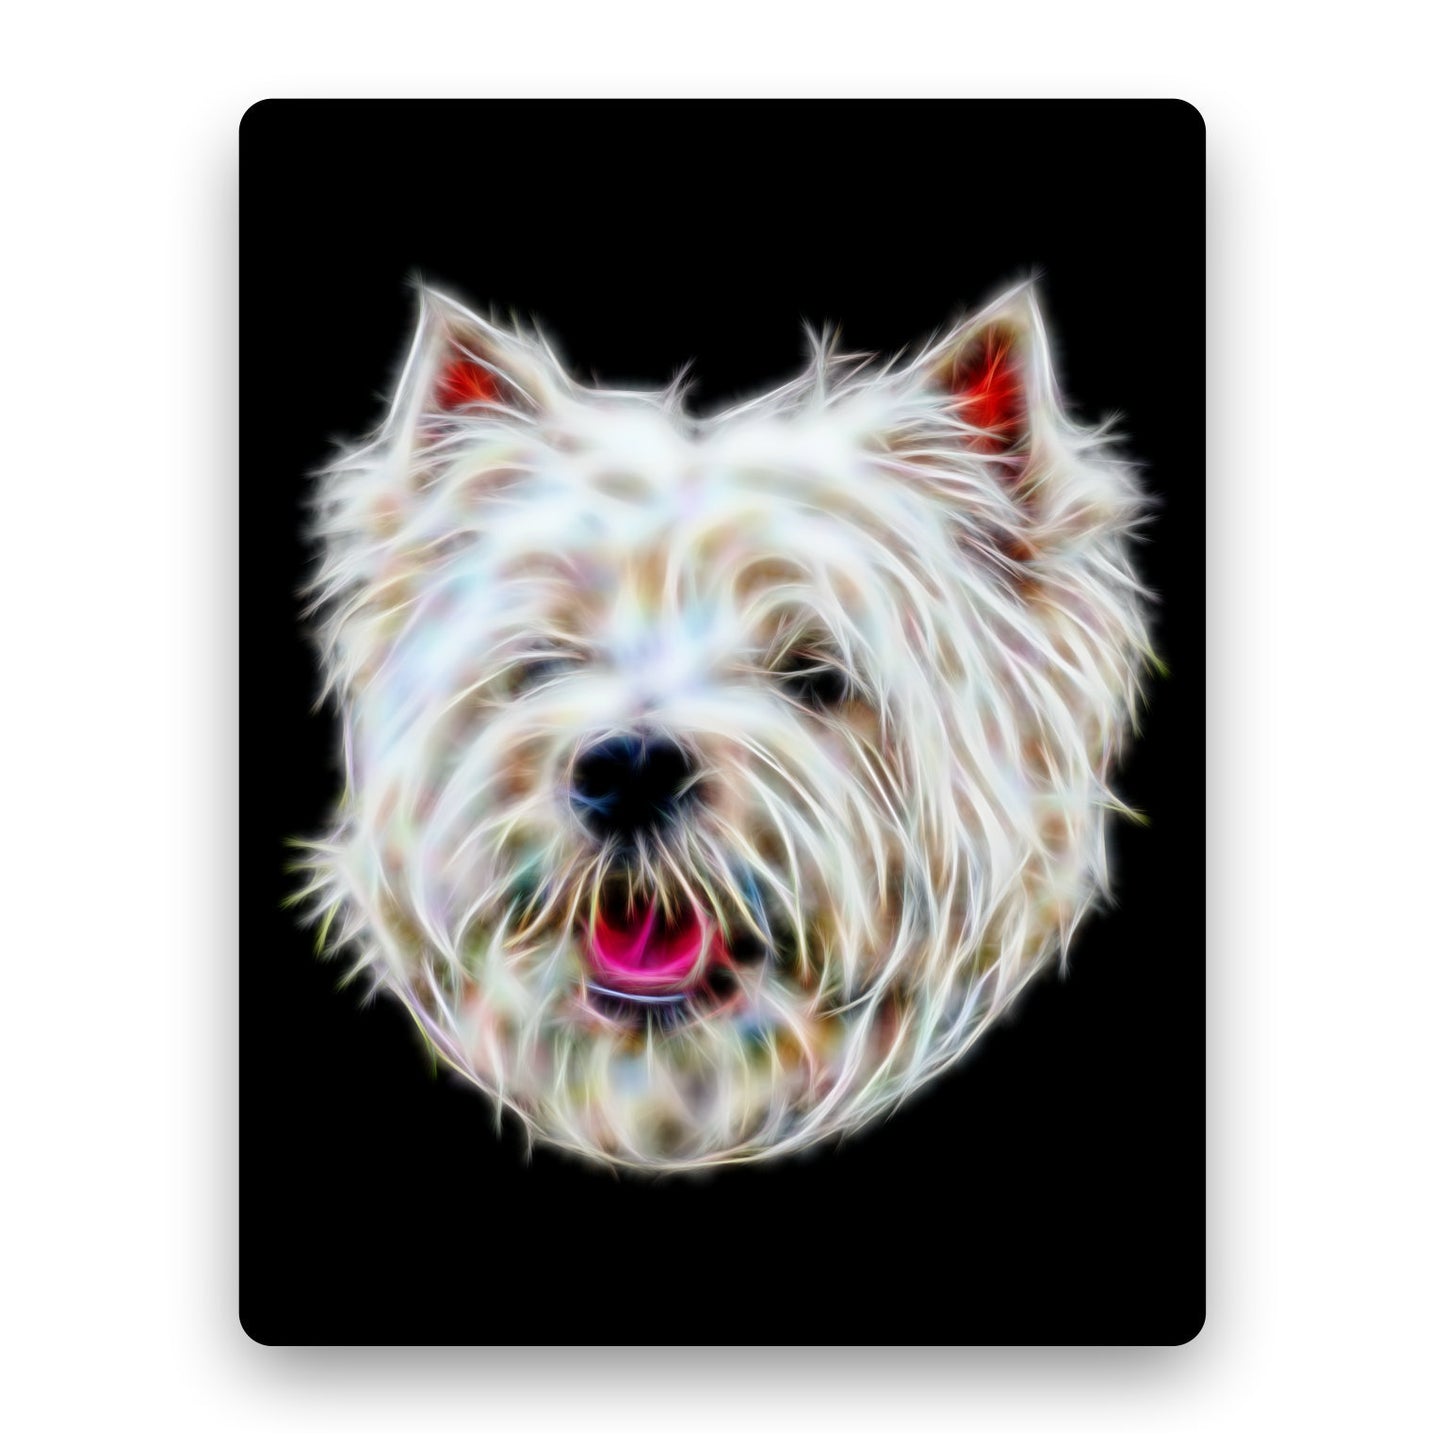 West Highland Terrier Metal Wall Plaque with Stunning Fractal Art Design. Also available as Mouse Pad, Keychain or Coaster.